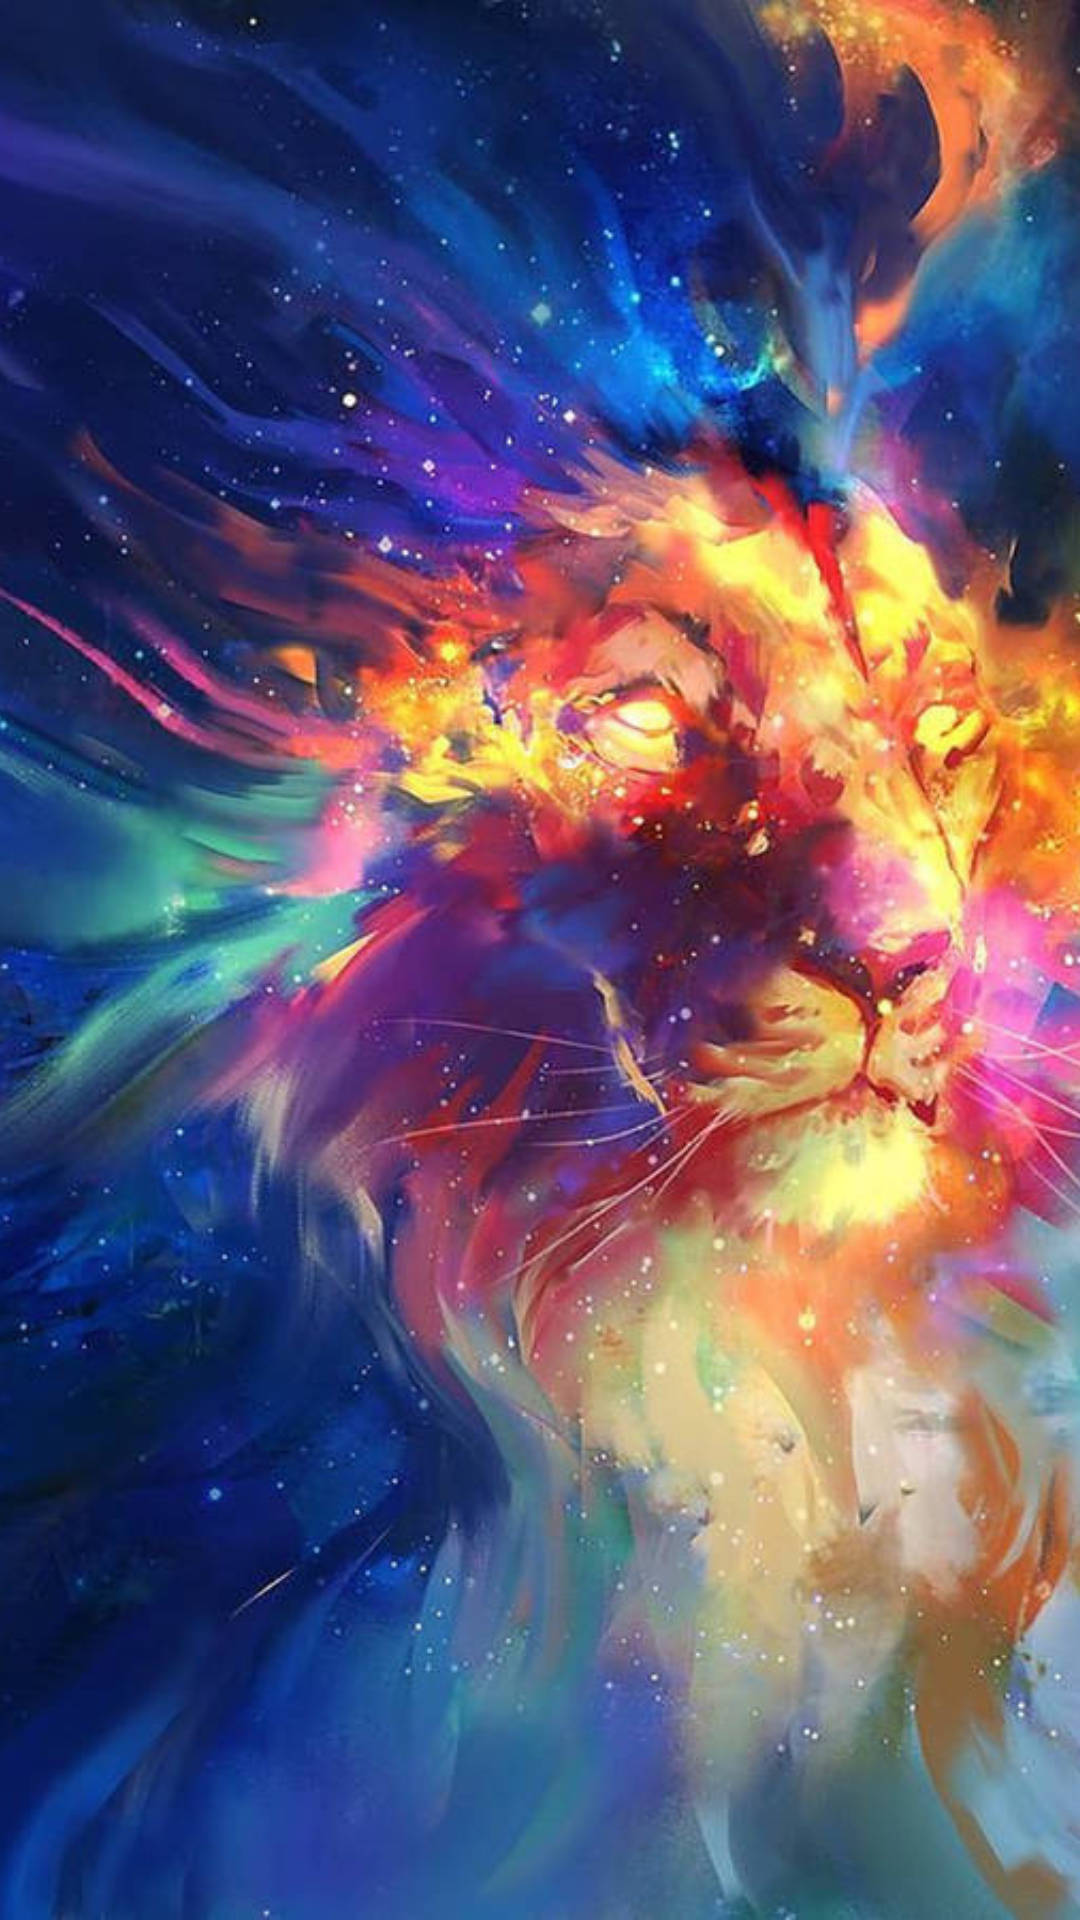 Rainbow Galaxy Forming A Lion’s Face